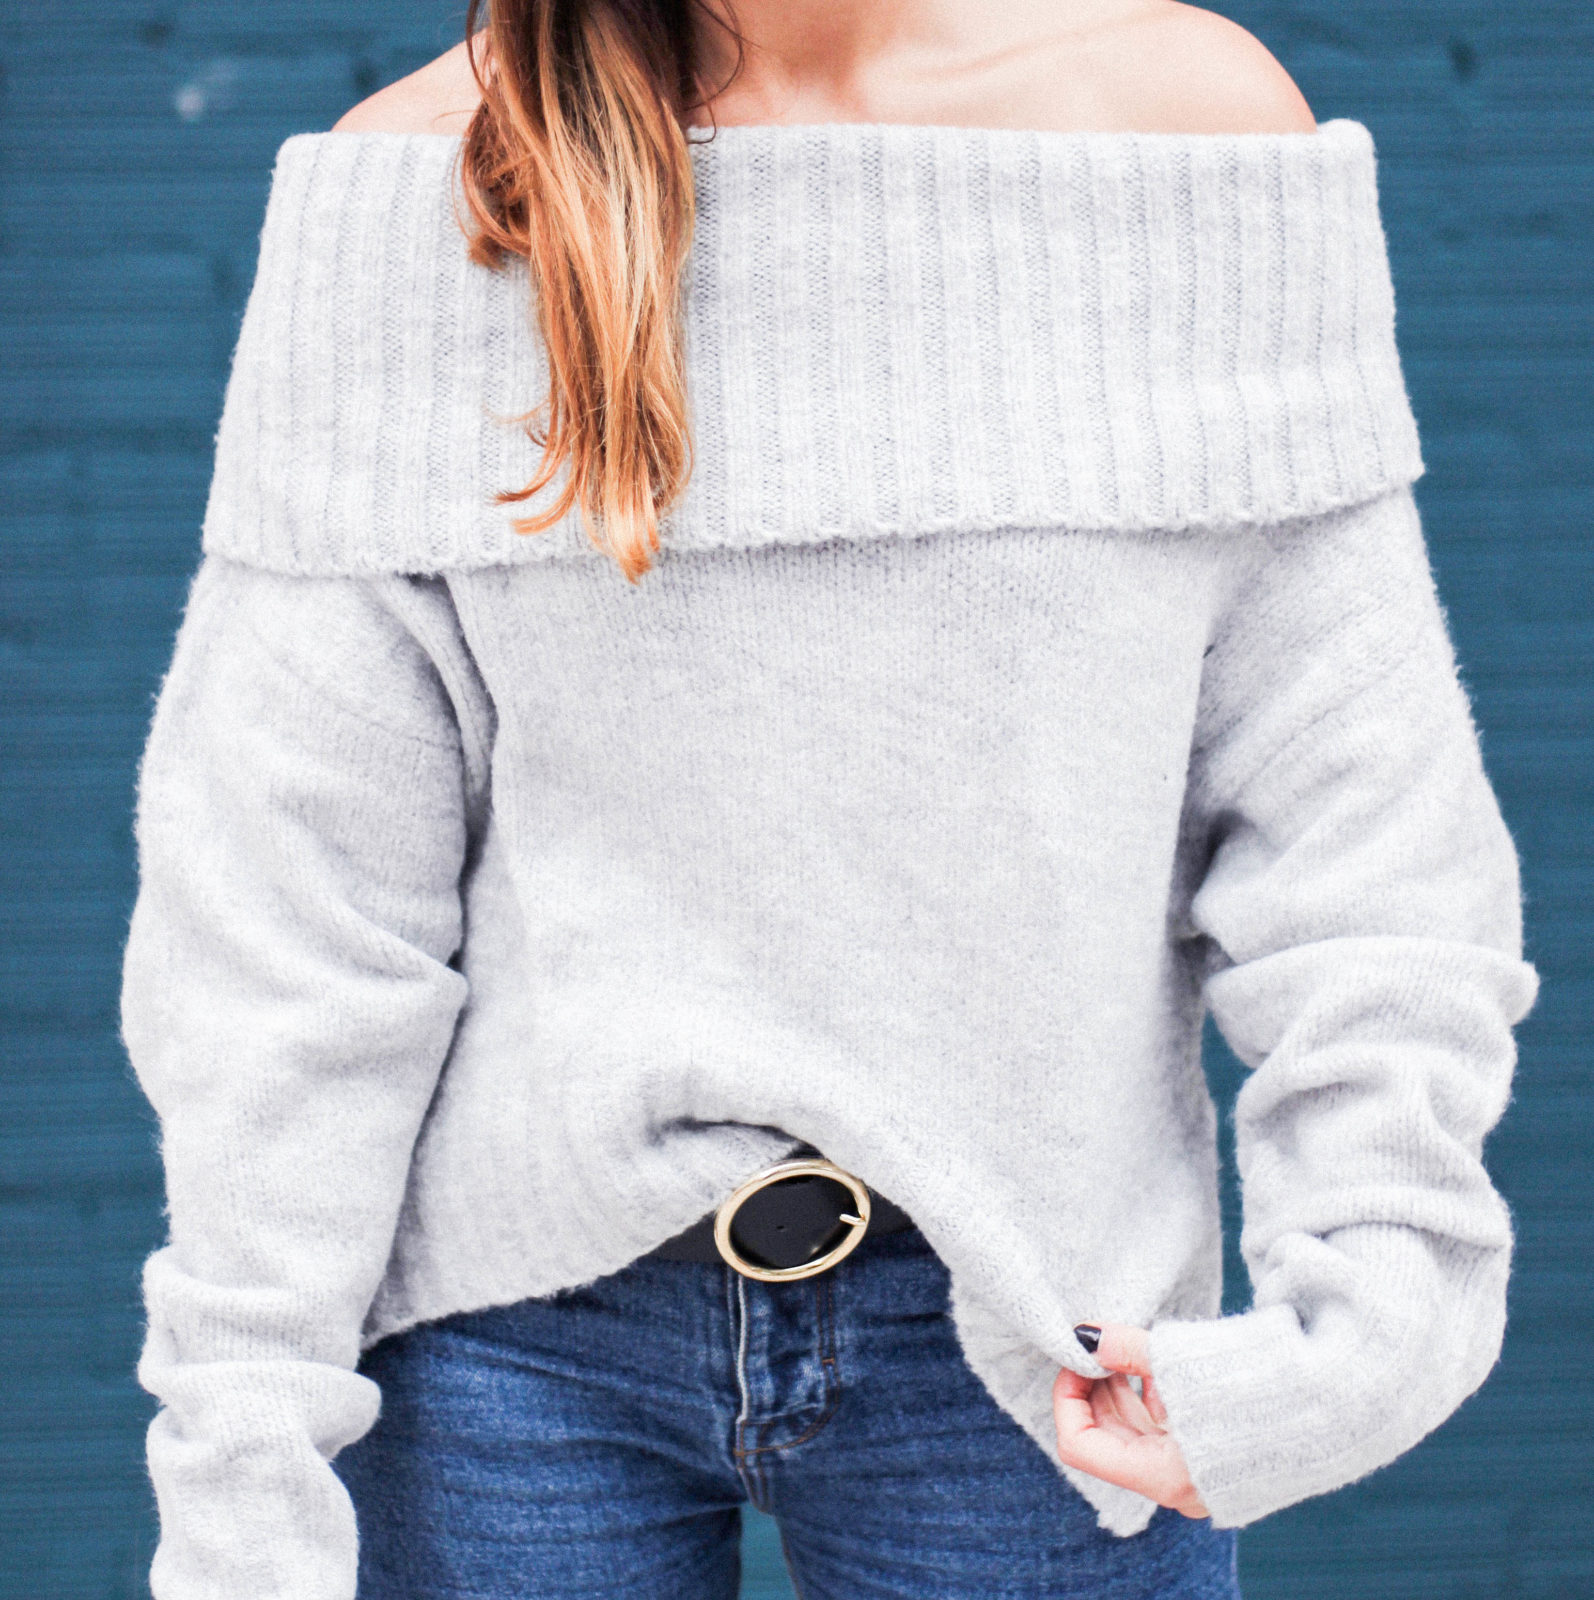 blogger-tips-jersey-sweaters-off-the-shoulder-shein-vans-old-skool-trends-street_style-donkeycool-3